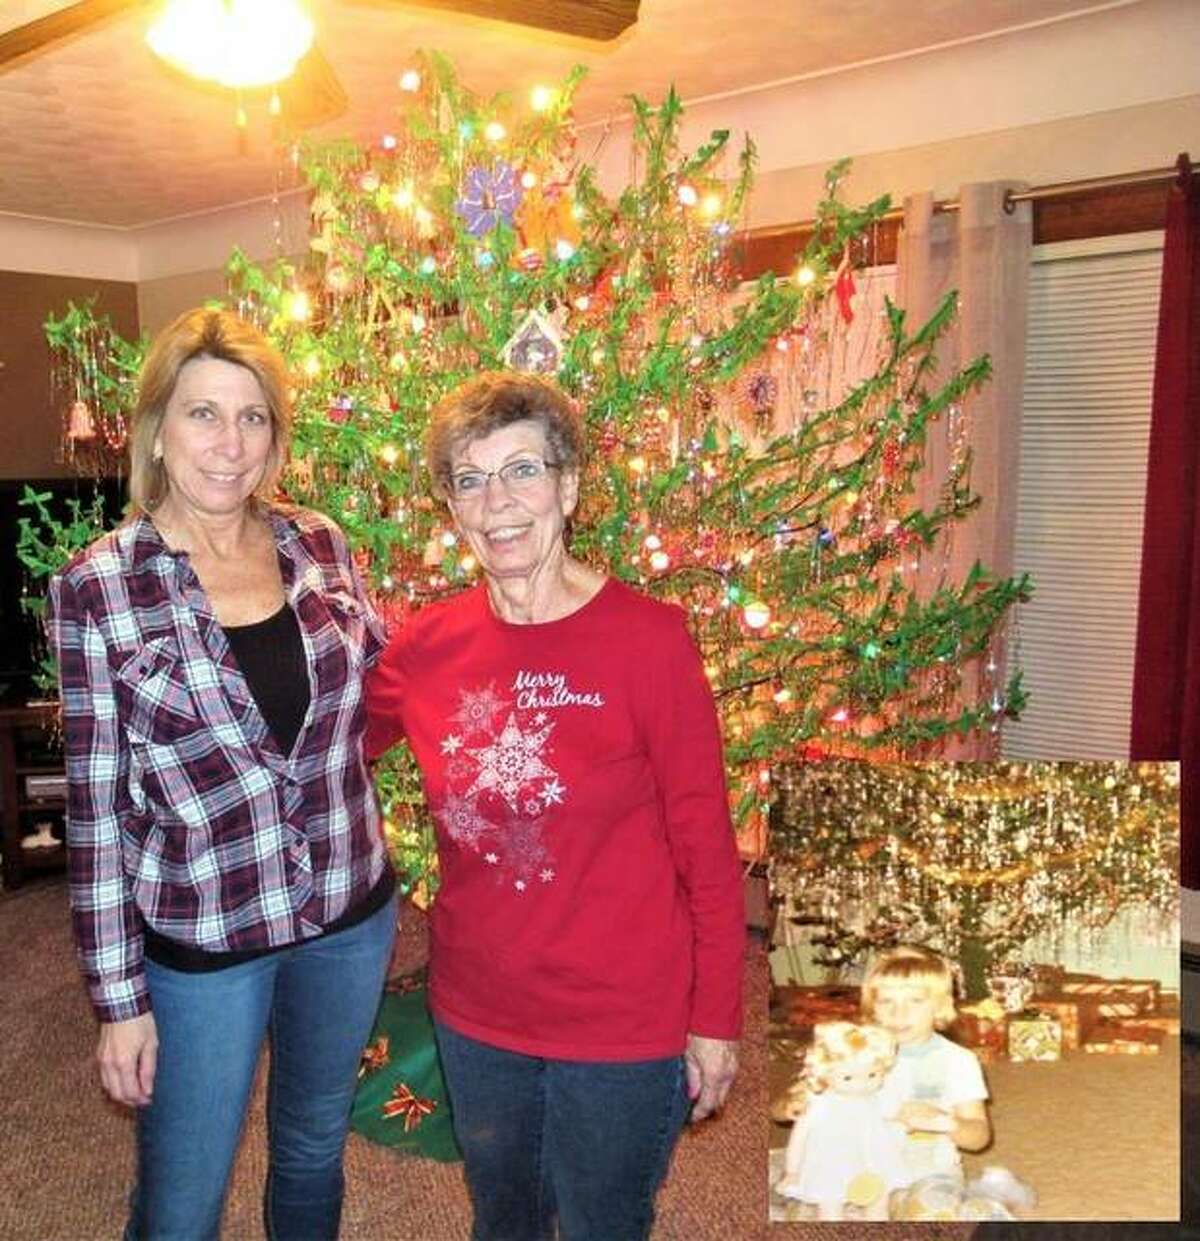 Diana Sugg, left, is carrying on a family tradition this Christmas with a sassafras tree similar to the one created by her mother, Carol Rives, in 1971, as seen in the inset. The tree is a bare sassafras tree wrapped in green crepe paper, adorned with six boxes of tinsel, 200 handmade ornaments and 400 lights.